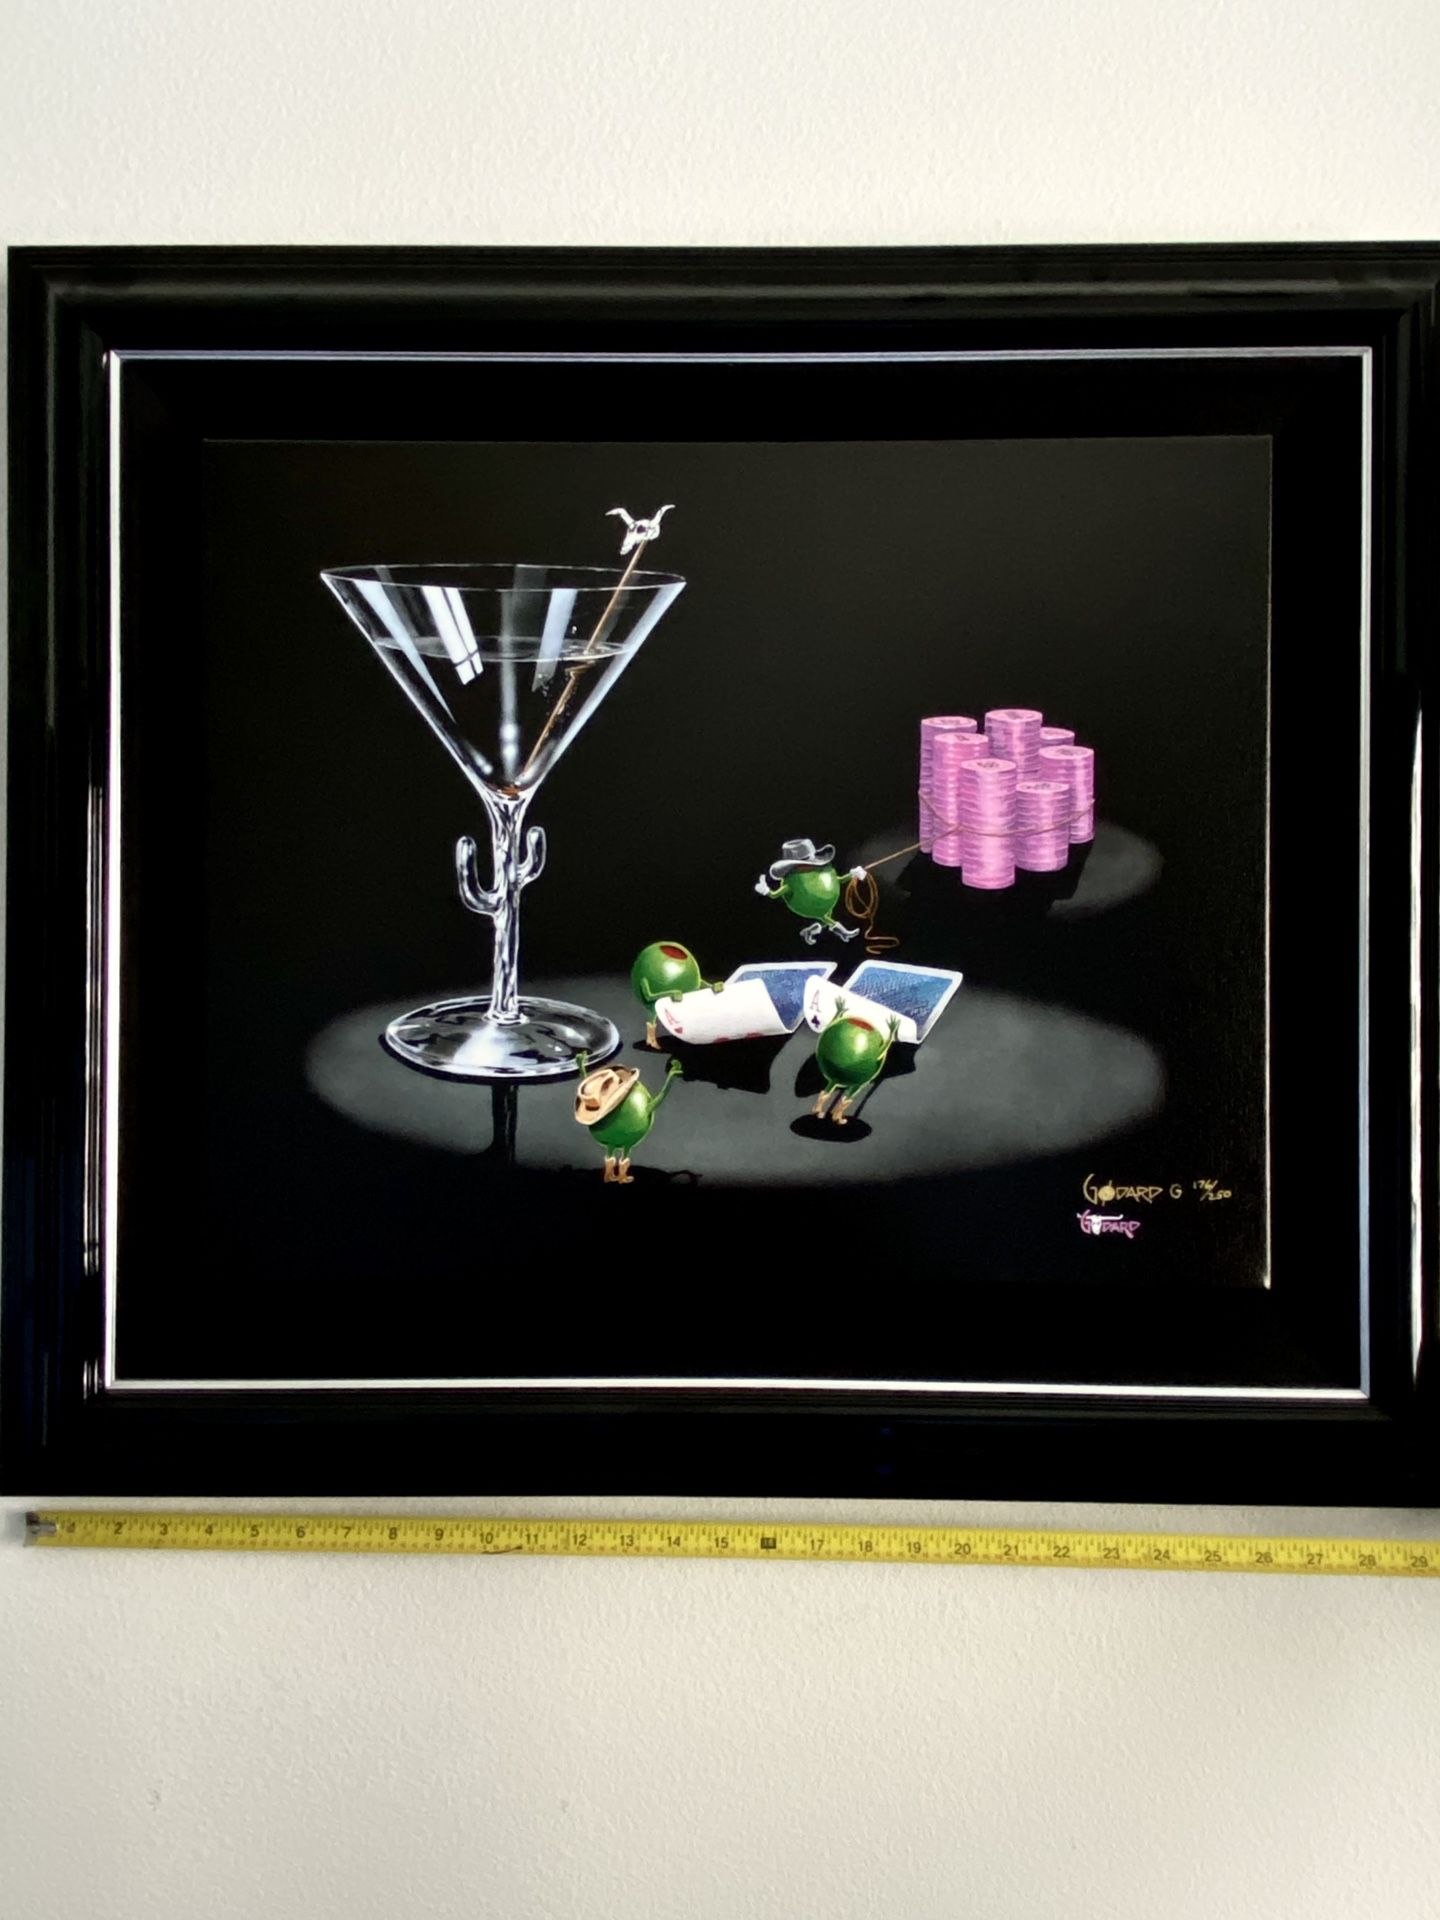 Michael Godard - ‘POCKET ROCKETS (ALL IN)’ | Certificate of Authenticity | Signed by the Artist | Limited Edition of 250 | 23x18in | Framed 30x25in